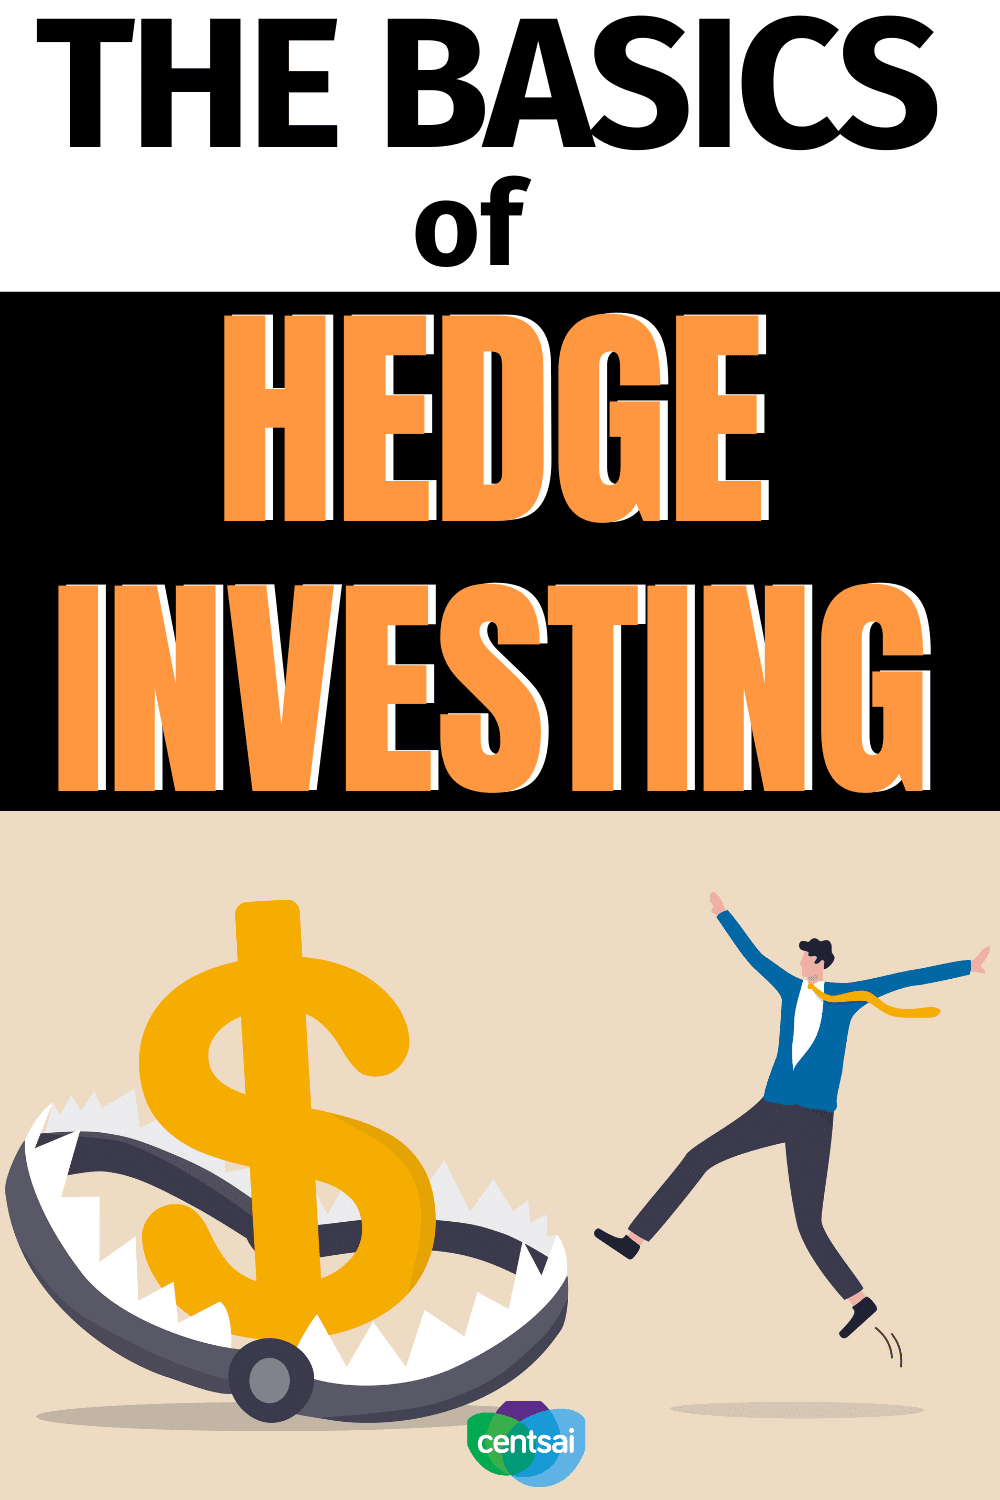 The Basics of Hedge Investing. If an investor wants to play with higher risk investments, hedge investing can help reduce their exposure — here's what you need to know. #CentSai #HedgeInvesting #investingtips #investingmoney